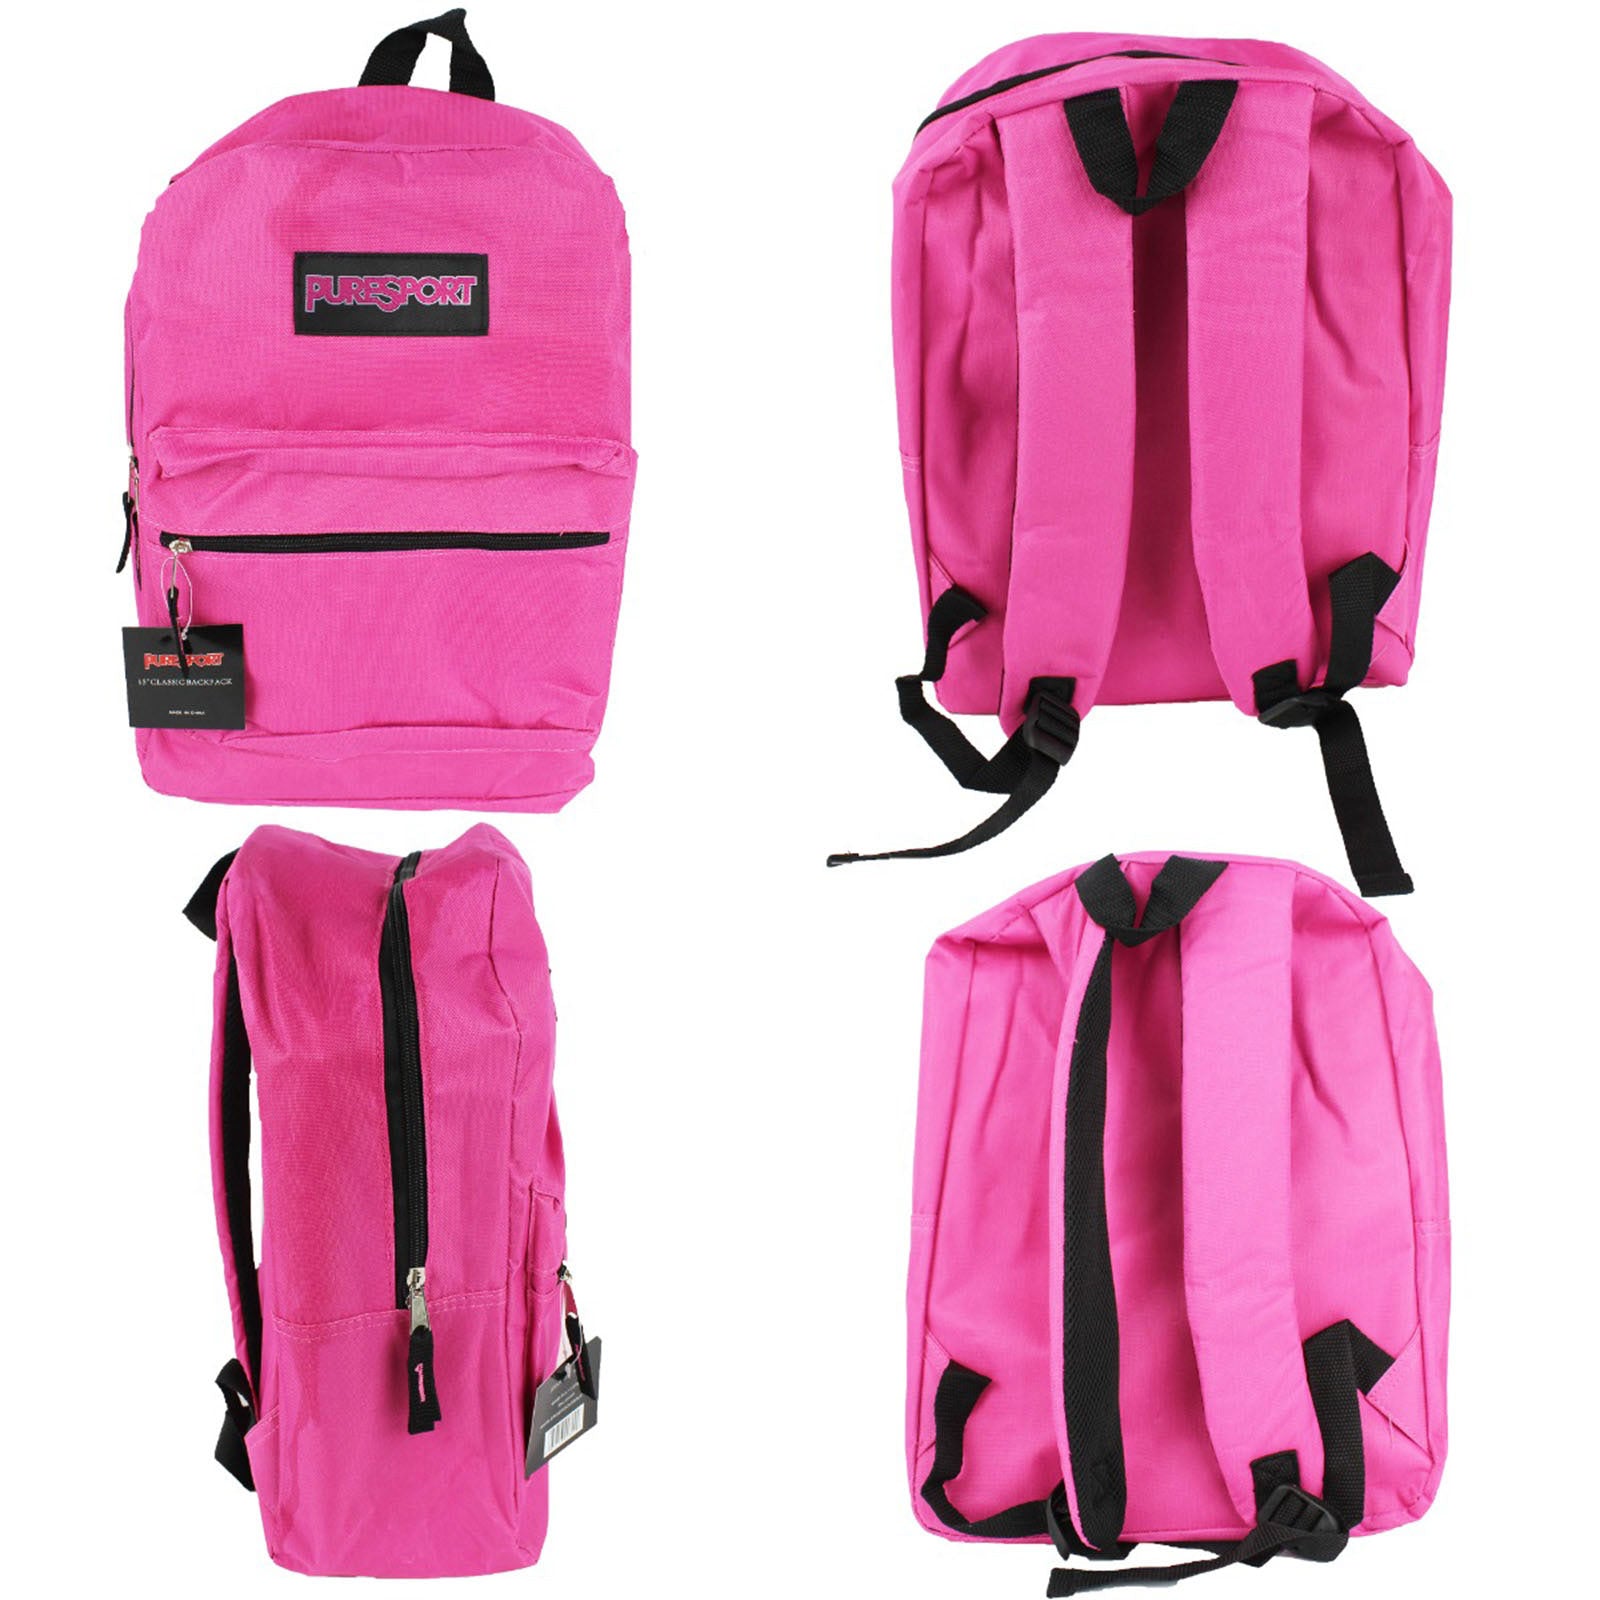 bulk wholesale backpacks in pink 17 inch bookbags for back to school